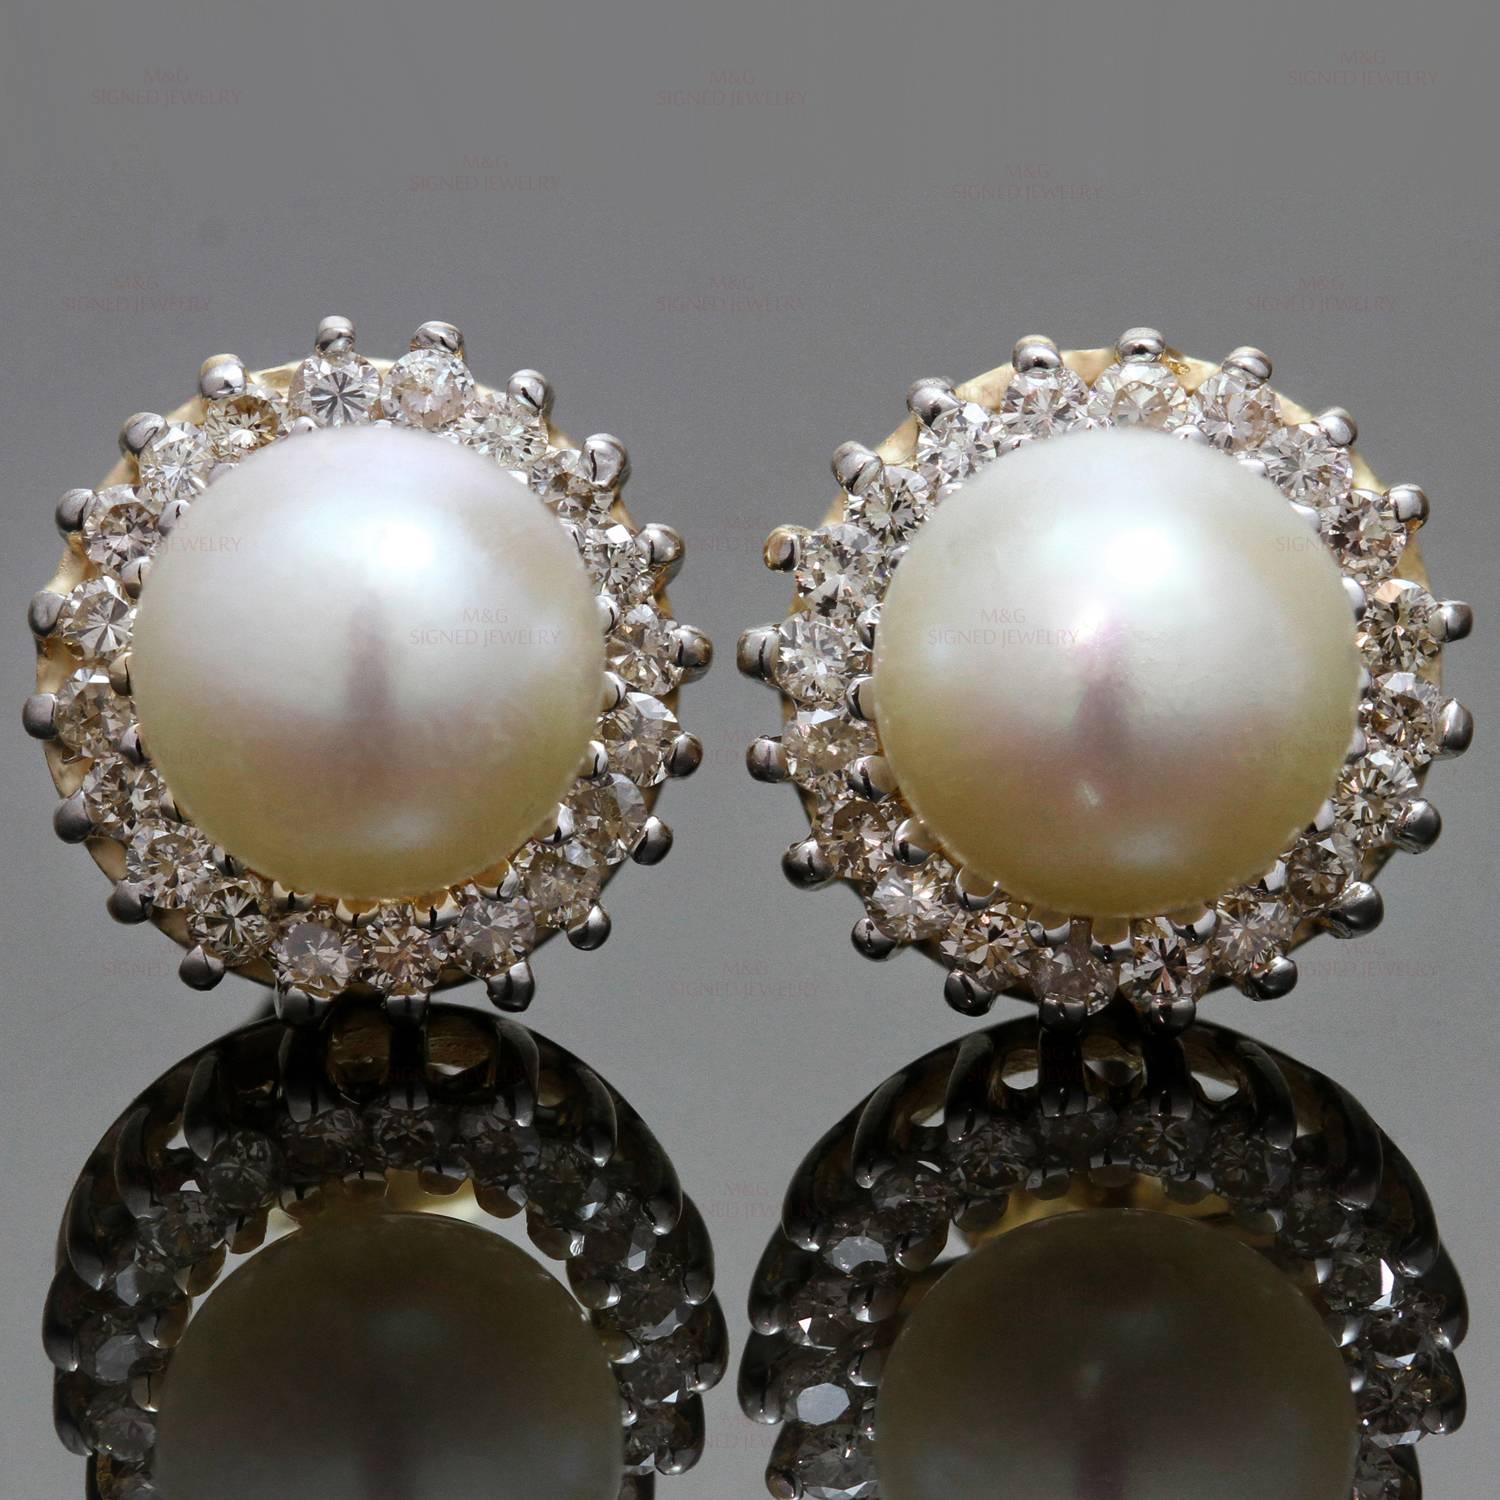 These elegant stud earrings are crafted in 14k yellow gold and set with freshwater cultured pearls measuring 7.5mm - 7.8mm and surrounded with round brilliant-cut diamonds of an estimated 0.80 carats. Made in United States circa 2010s. Measurements: